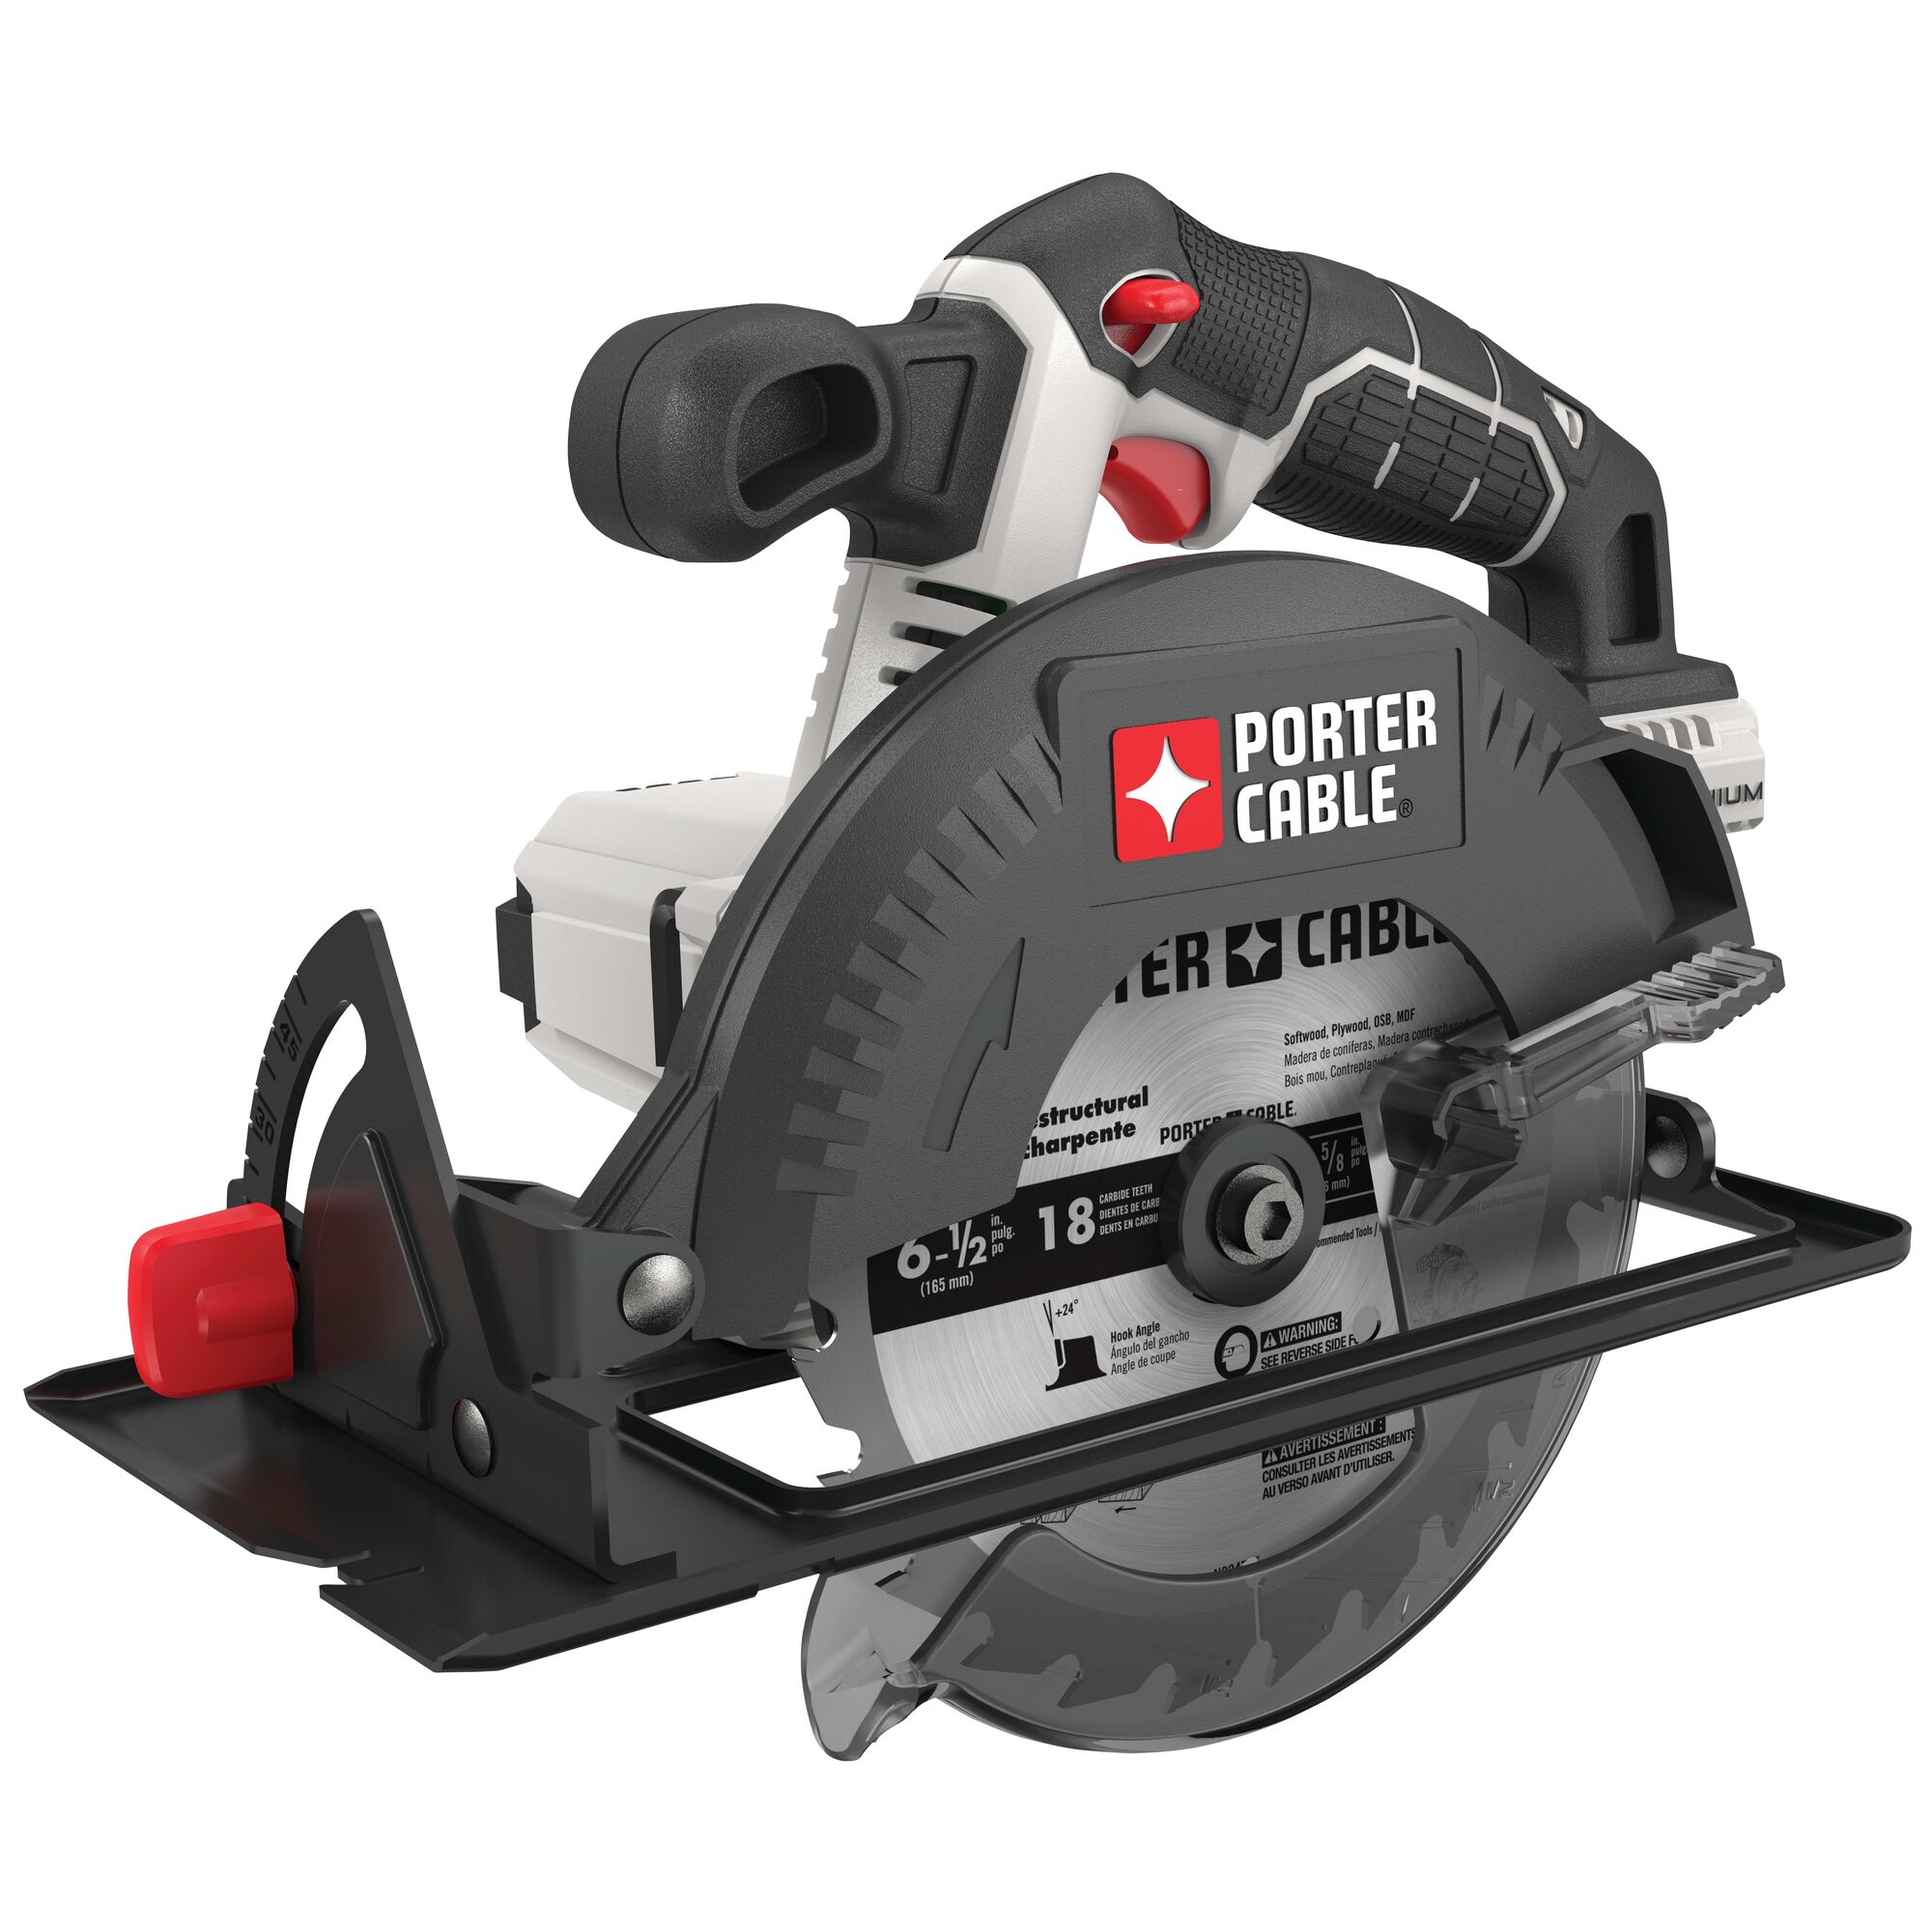 porter cable 20v skill saw Cheap Sell OFF 67%